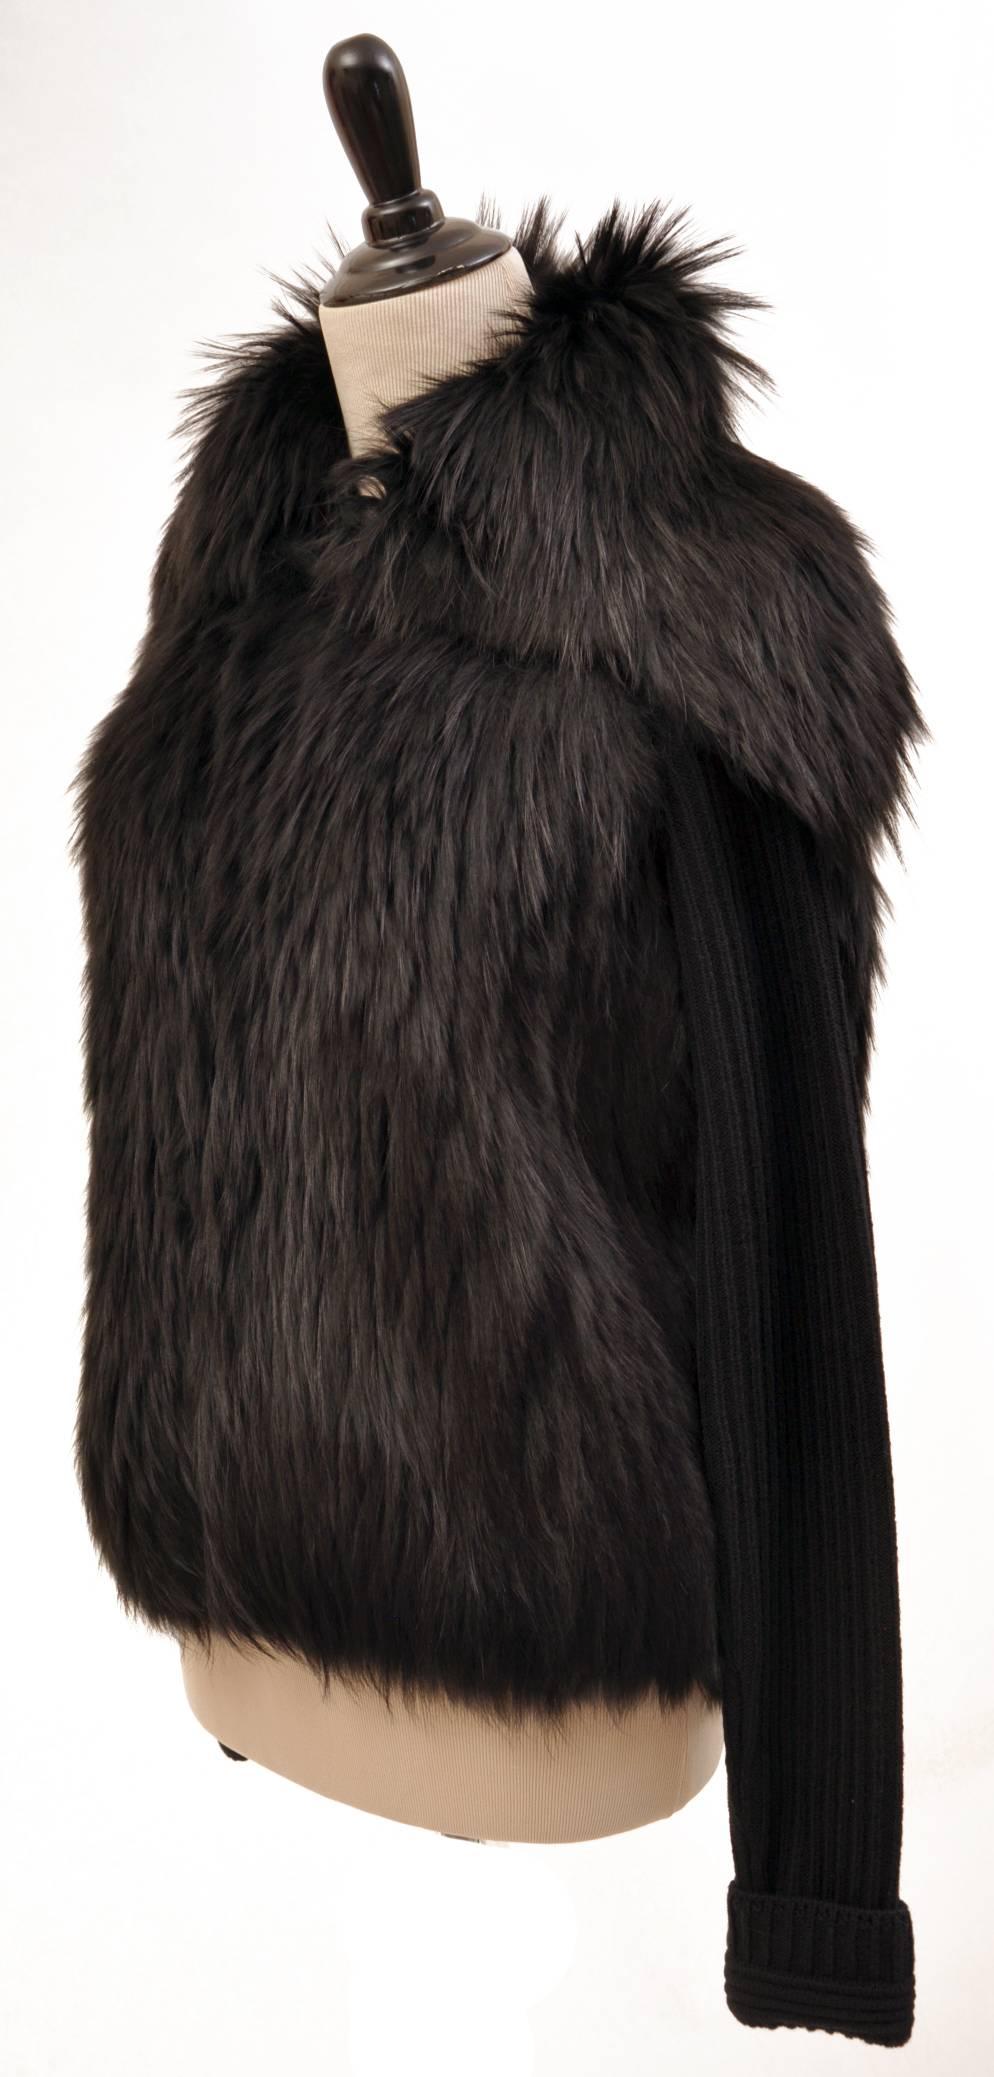 This sweater from Versace
features full-length sleeves,two pockets, and oversized collar.

95% wool, 5% elastine with 100% raccoon fur

Made in Italy

IT sizes: 42 and 44

Retail price is $6,125.00

New, with tags.

Due to restrictions, this item